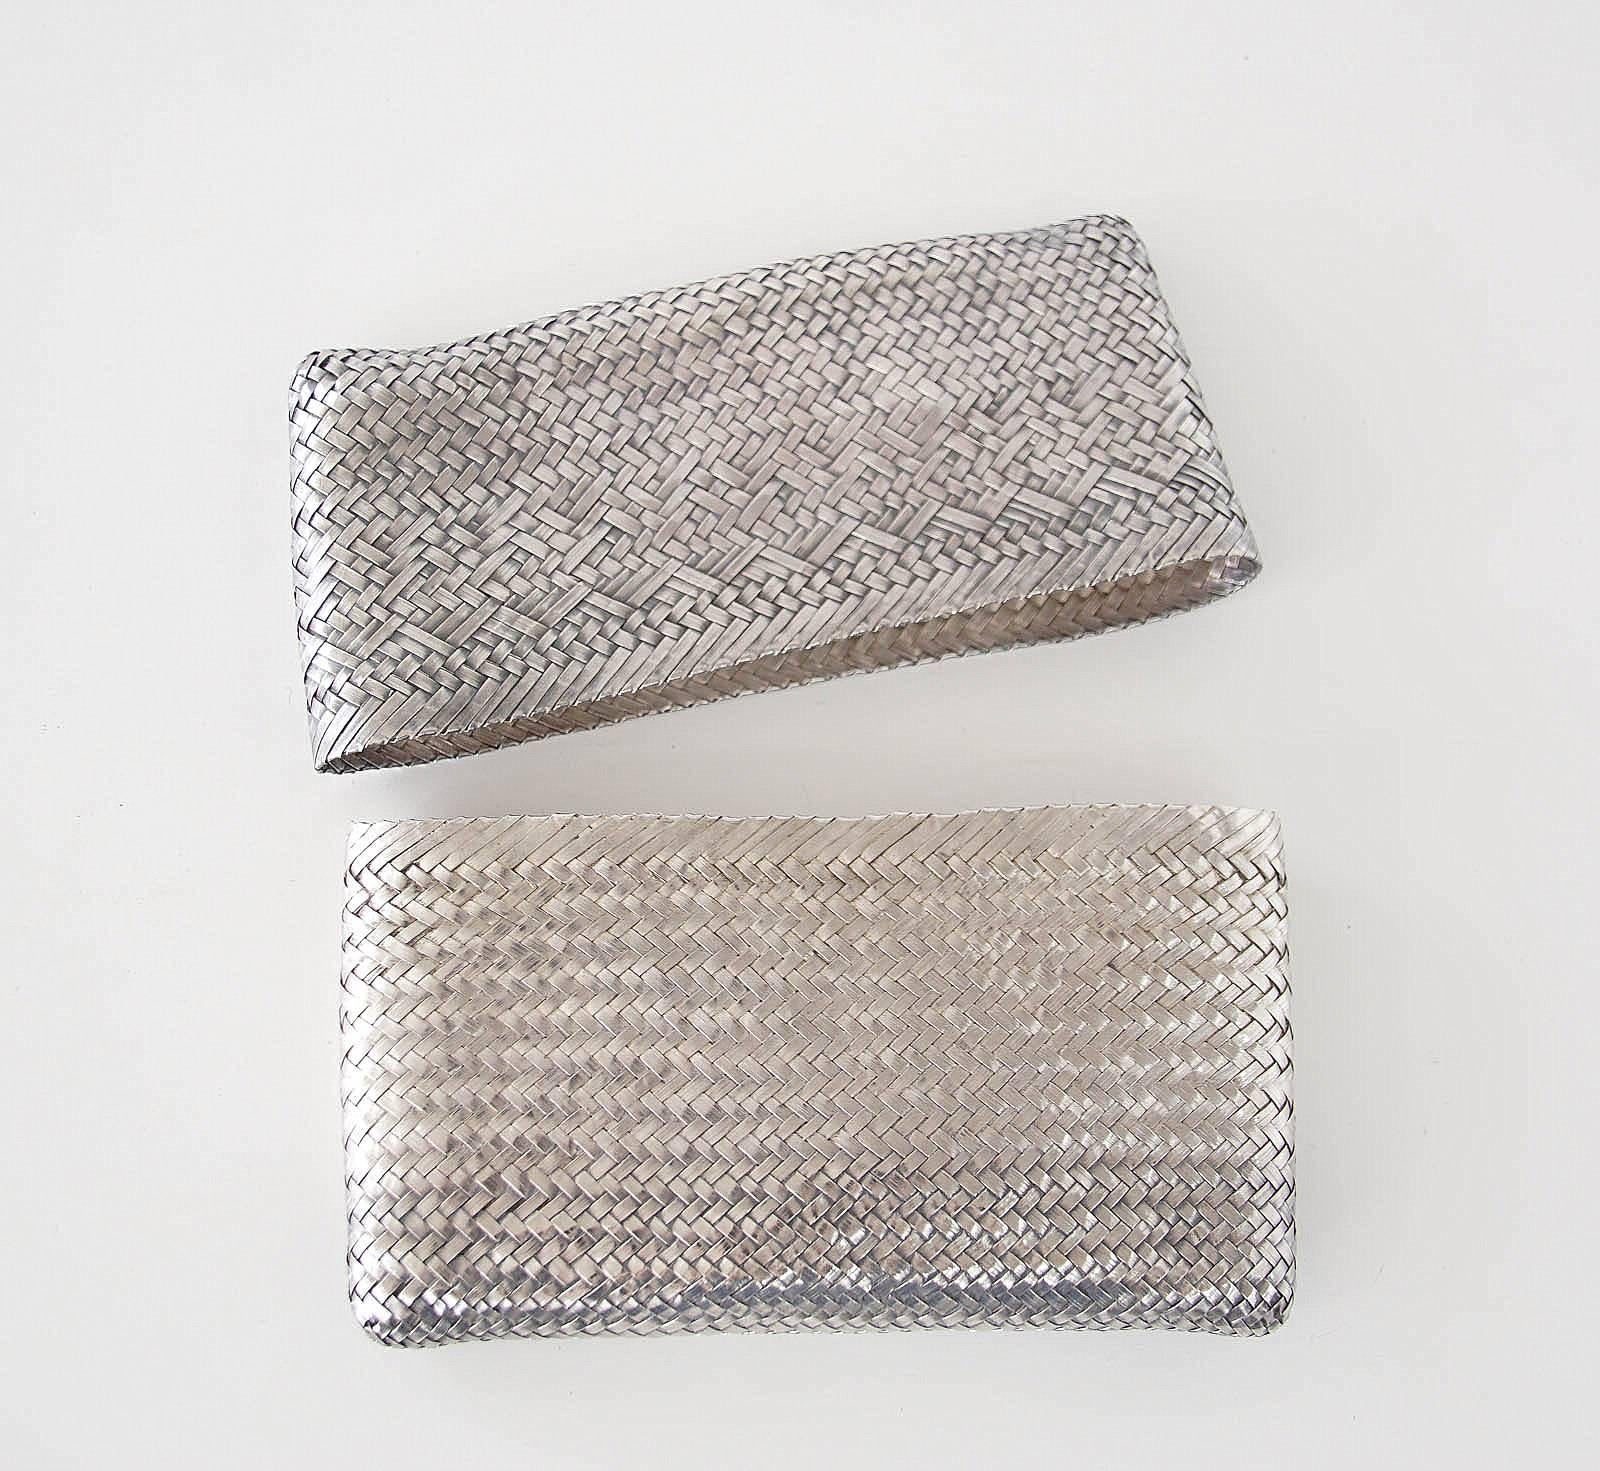 Guaranteed authentic TIFFANY&Co charming vintage ELSA PERETTI  woven sterling silver clutch bag.
The cap top of the clutch slips off to reveal interior and the sterling logo plaque.
The clutch has developed a patina which can be polished off or left